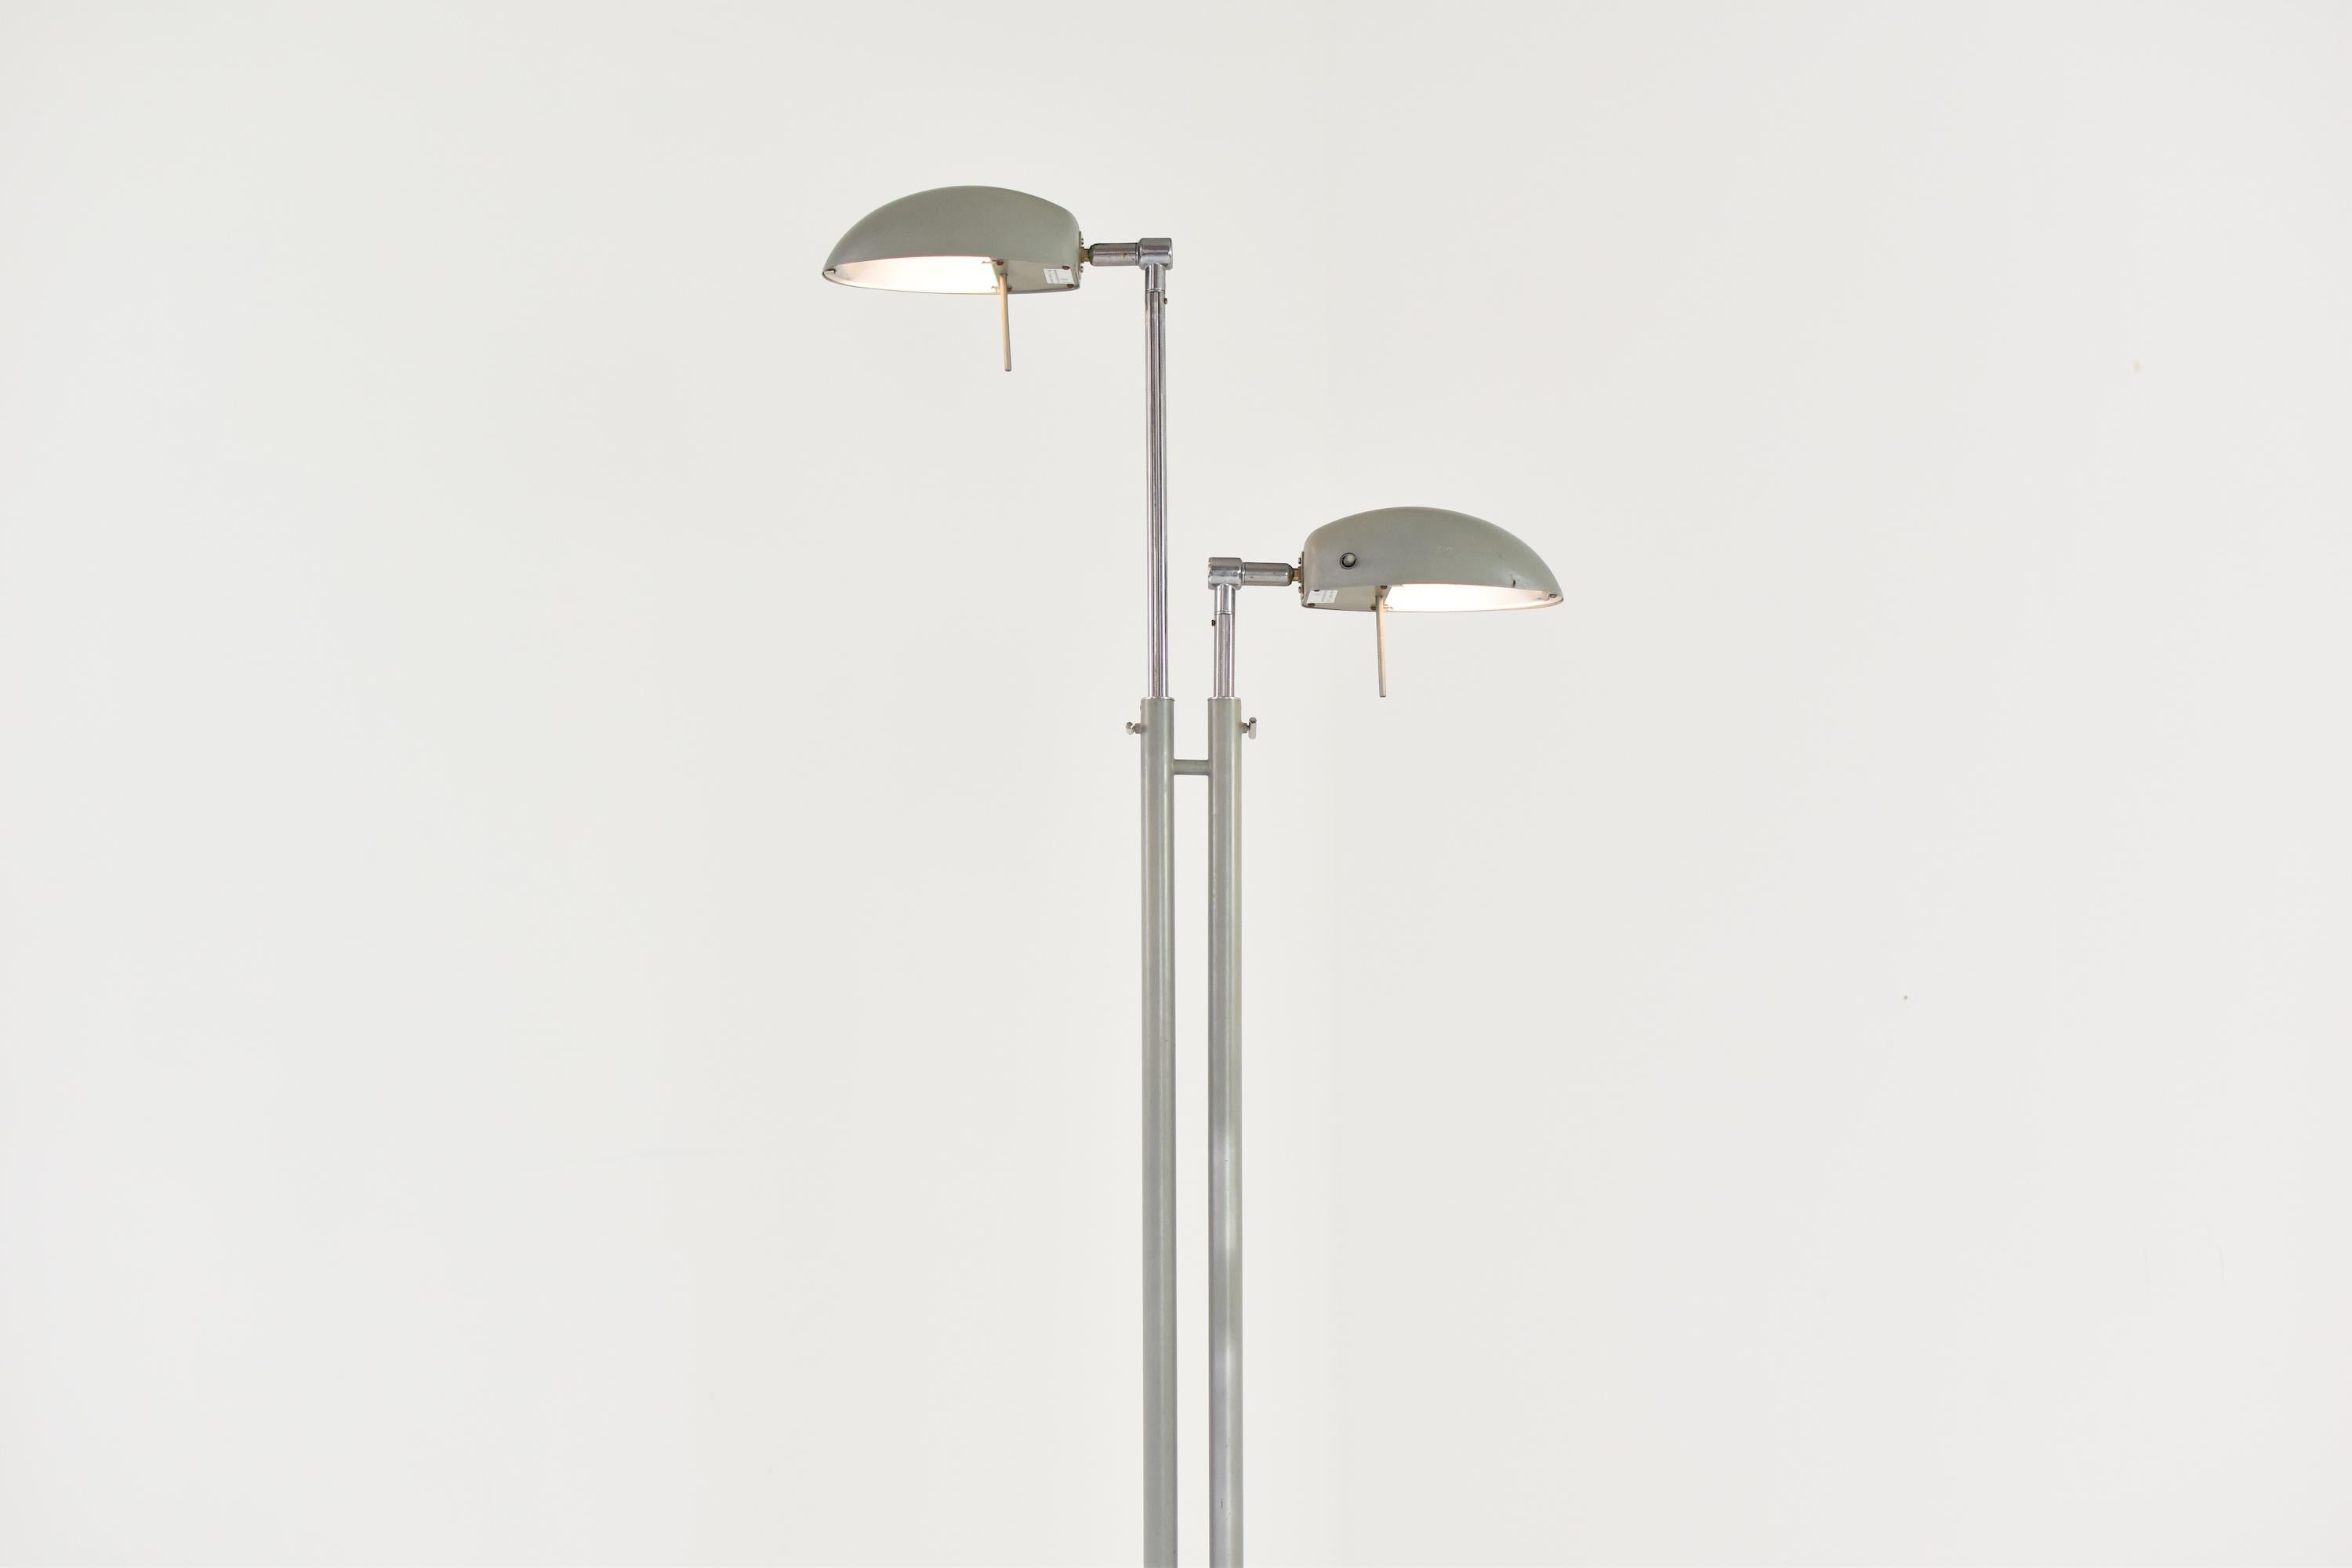 Industrial floor lamp from France, 1960s. This 2 shade floor lamp is adjustable in height and can be positioned in any angle preferred. It features the original mint green lacquer and is overall in a very good and original condition.